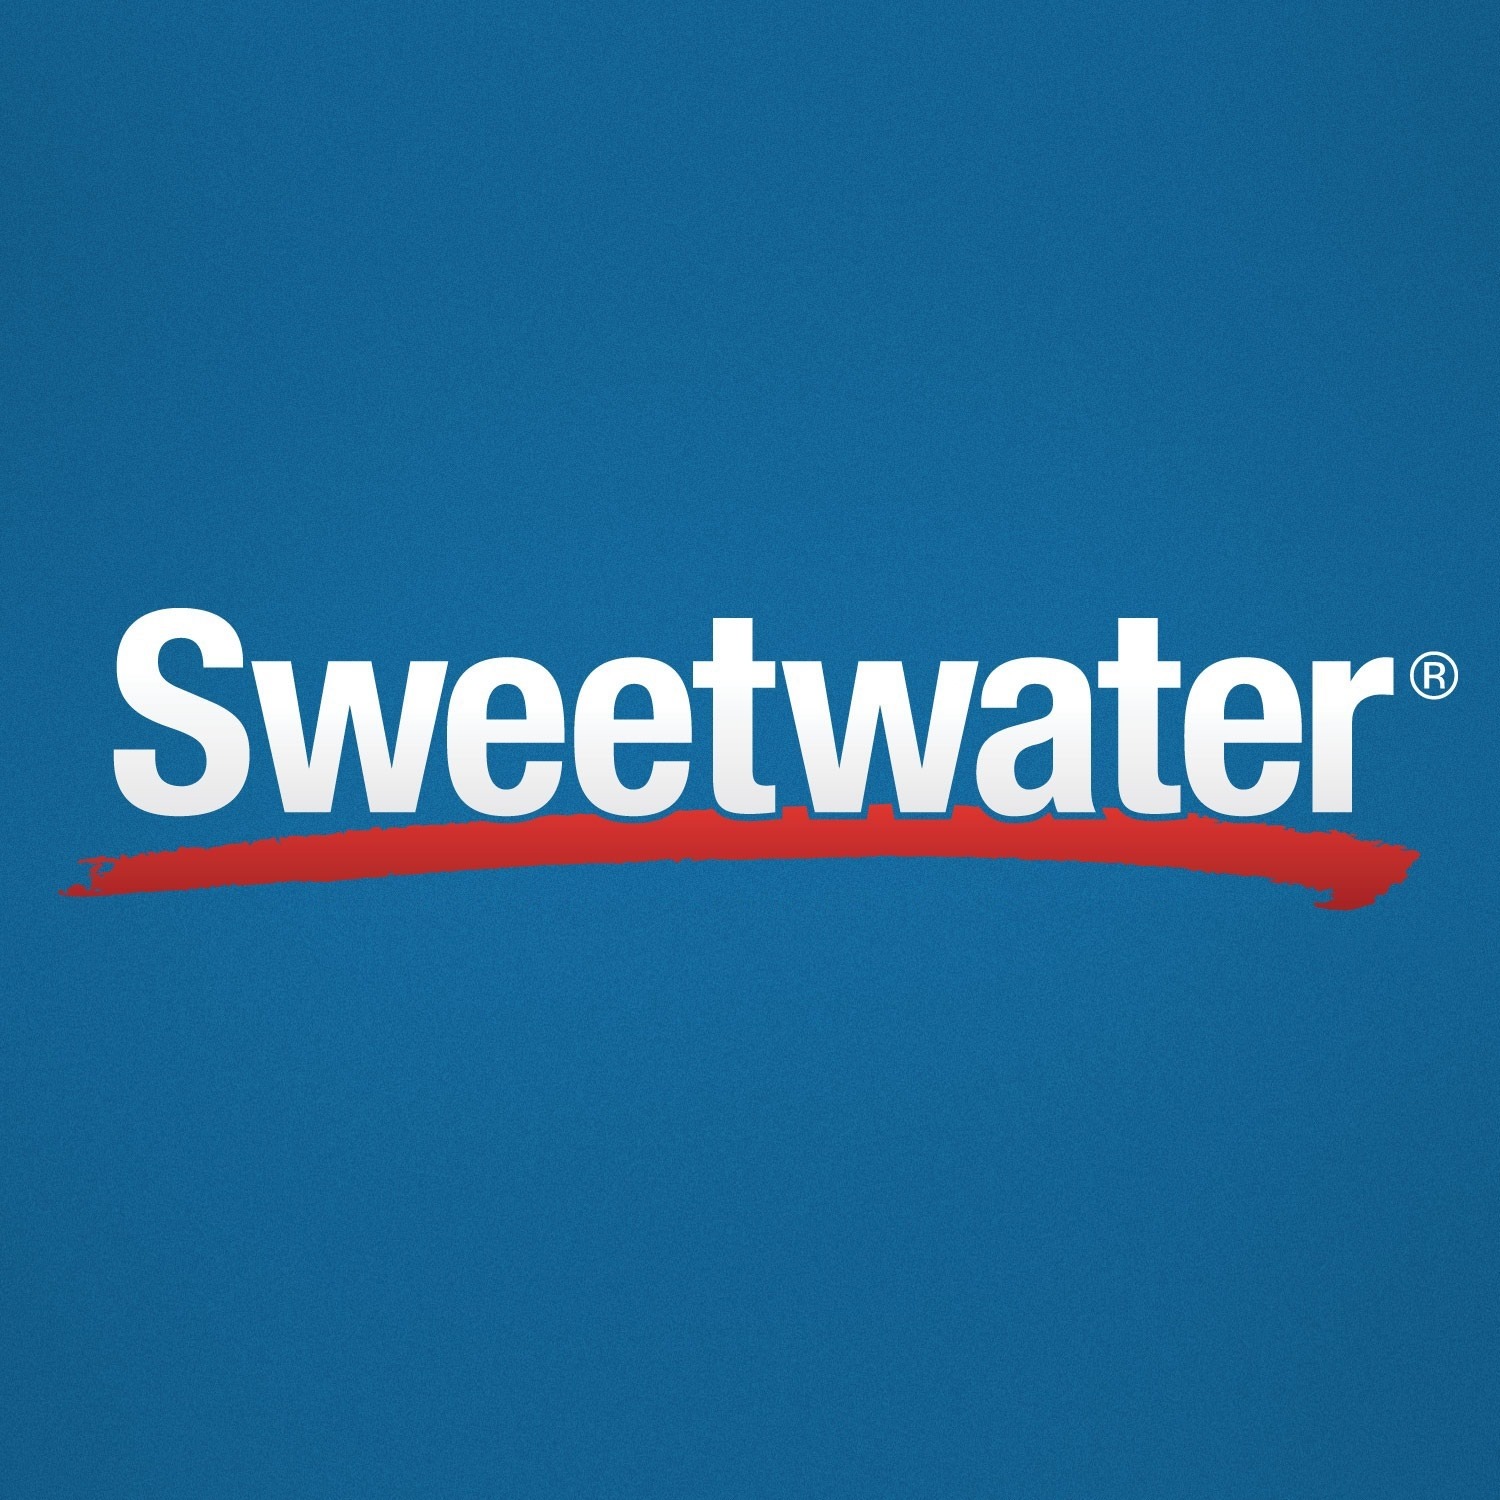 Company logo of Sweetwater